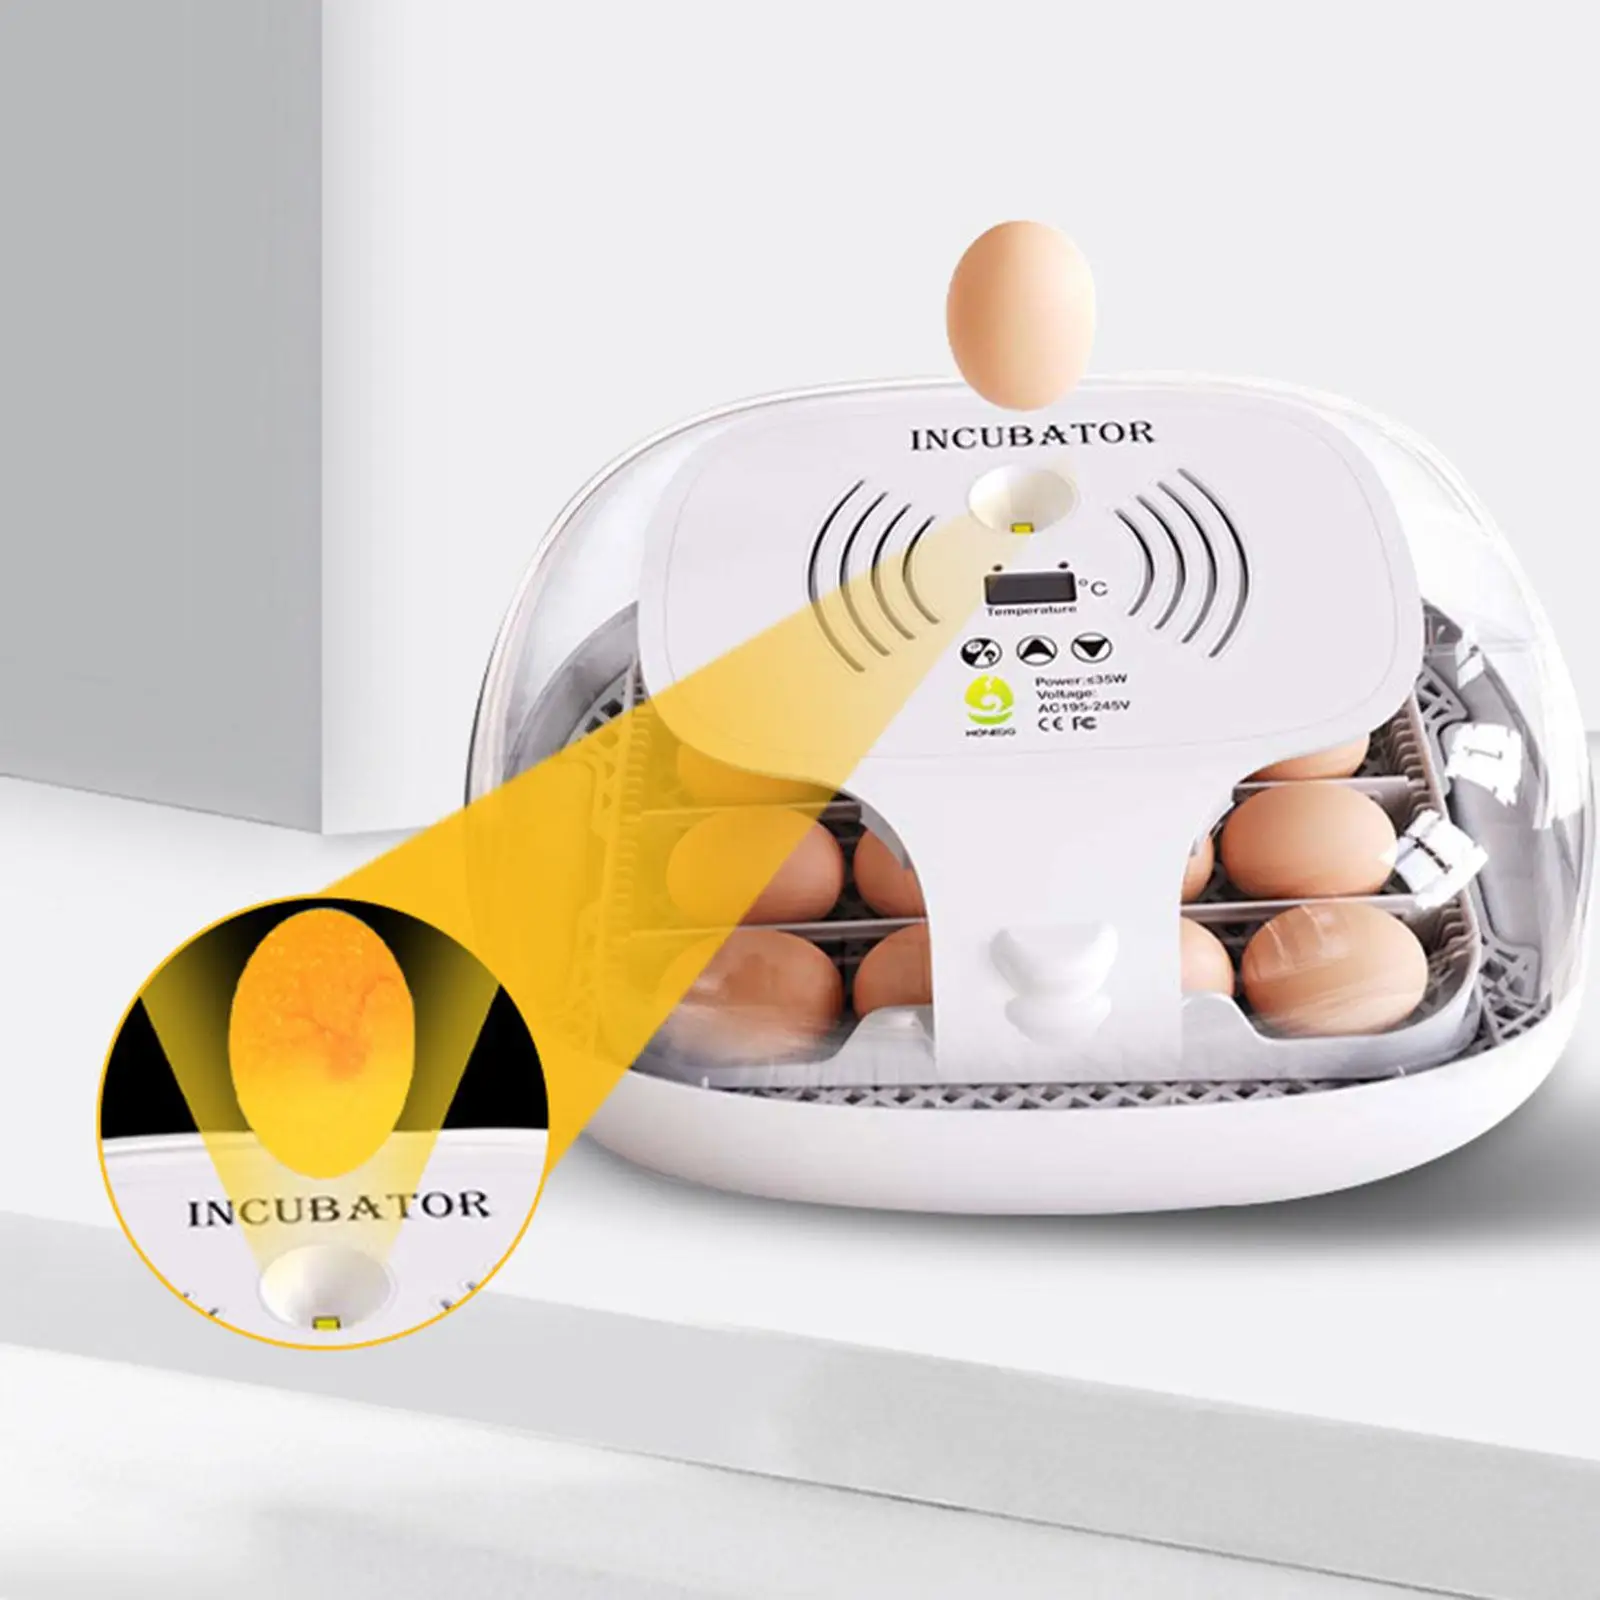 Portable Digital Automatic Egg Incubator 360 Turning Clear Top Cover Small Poultry Hatcher for Hatching Turkey Eggs Quail Duck